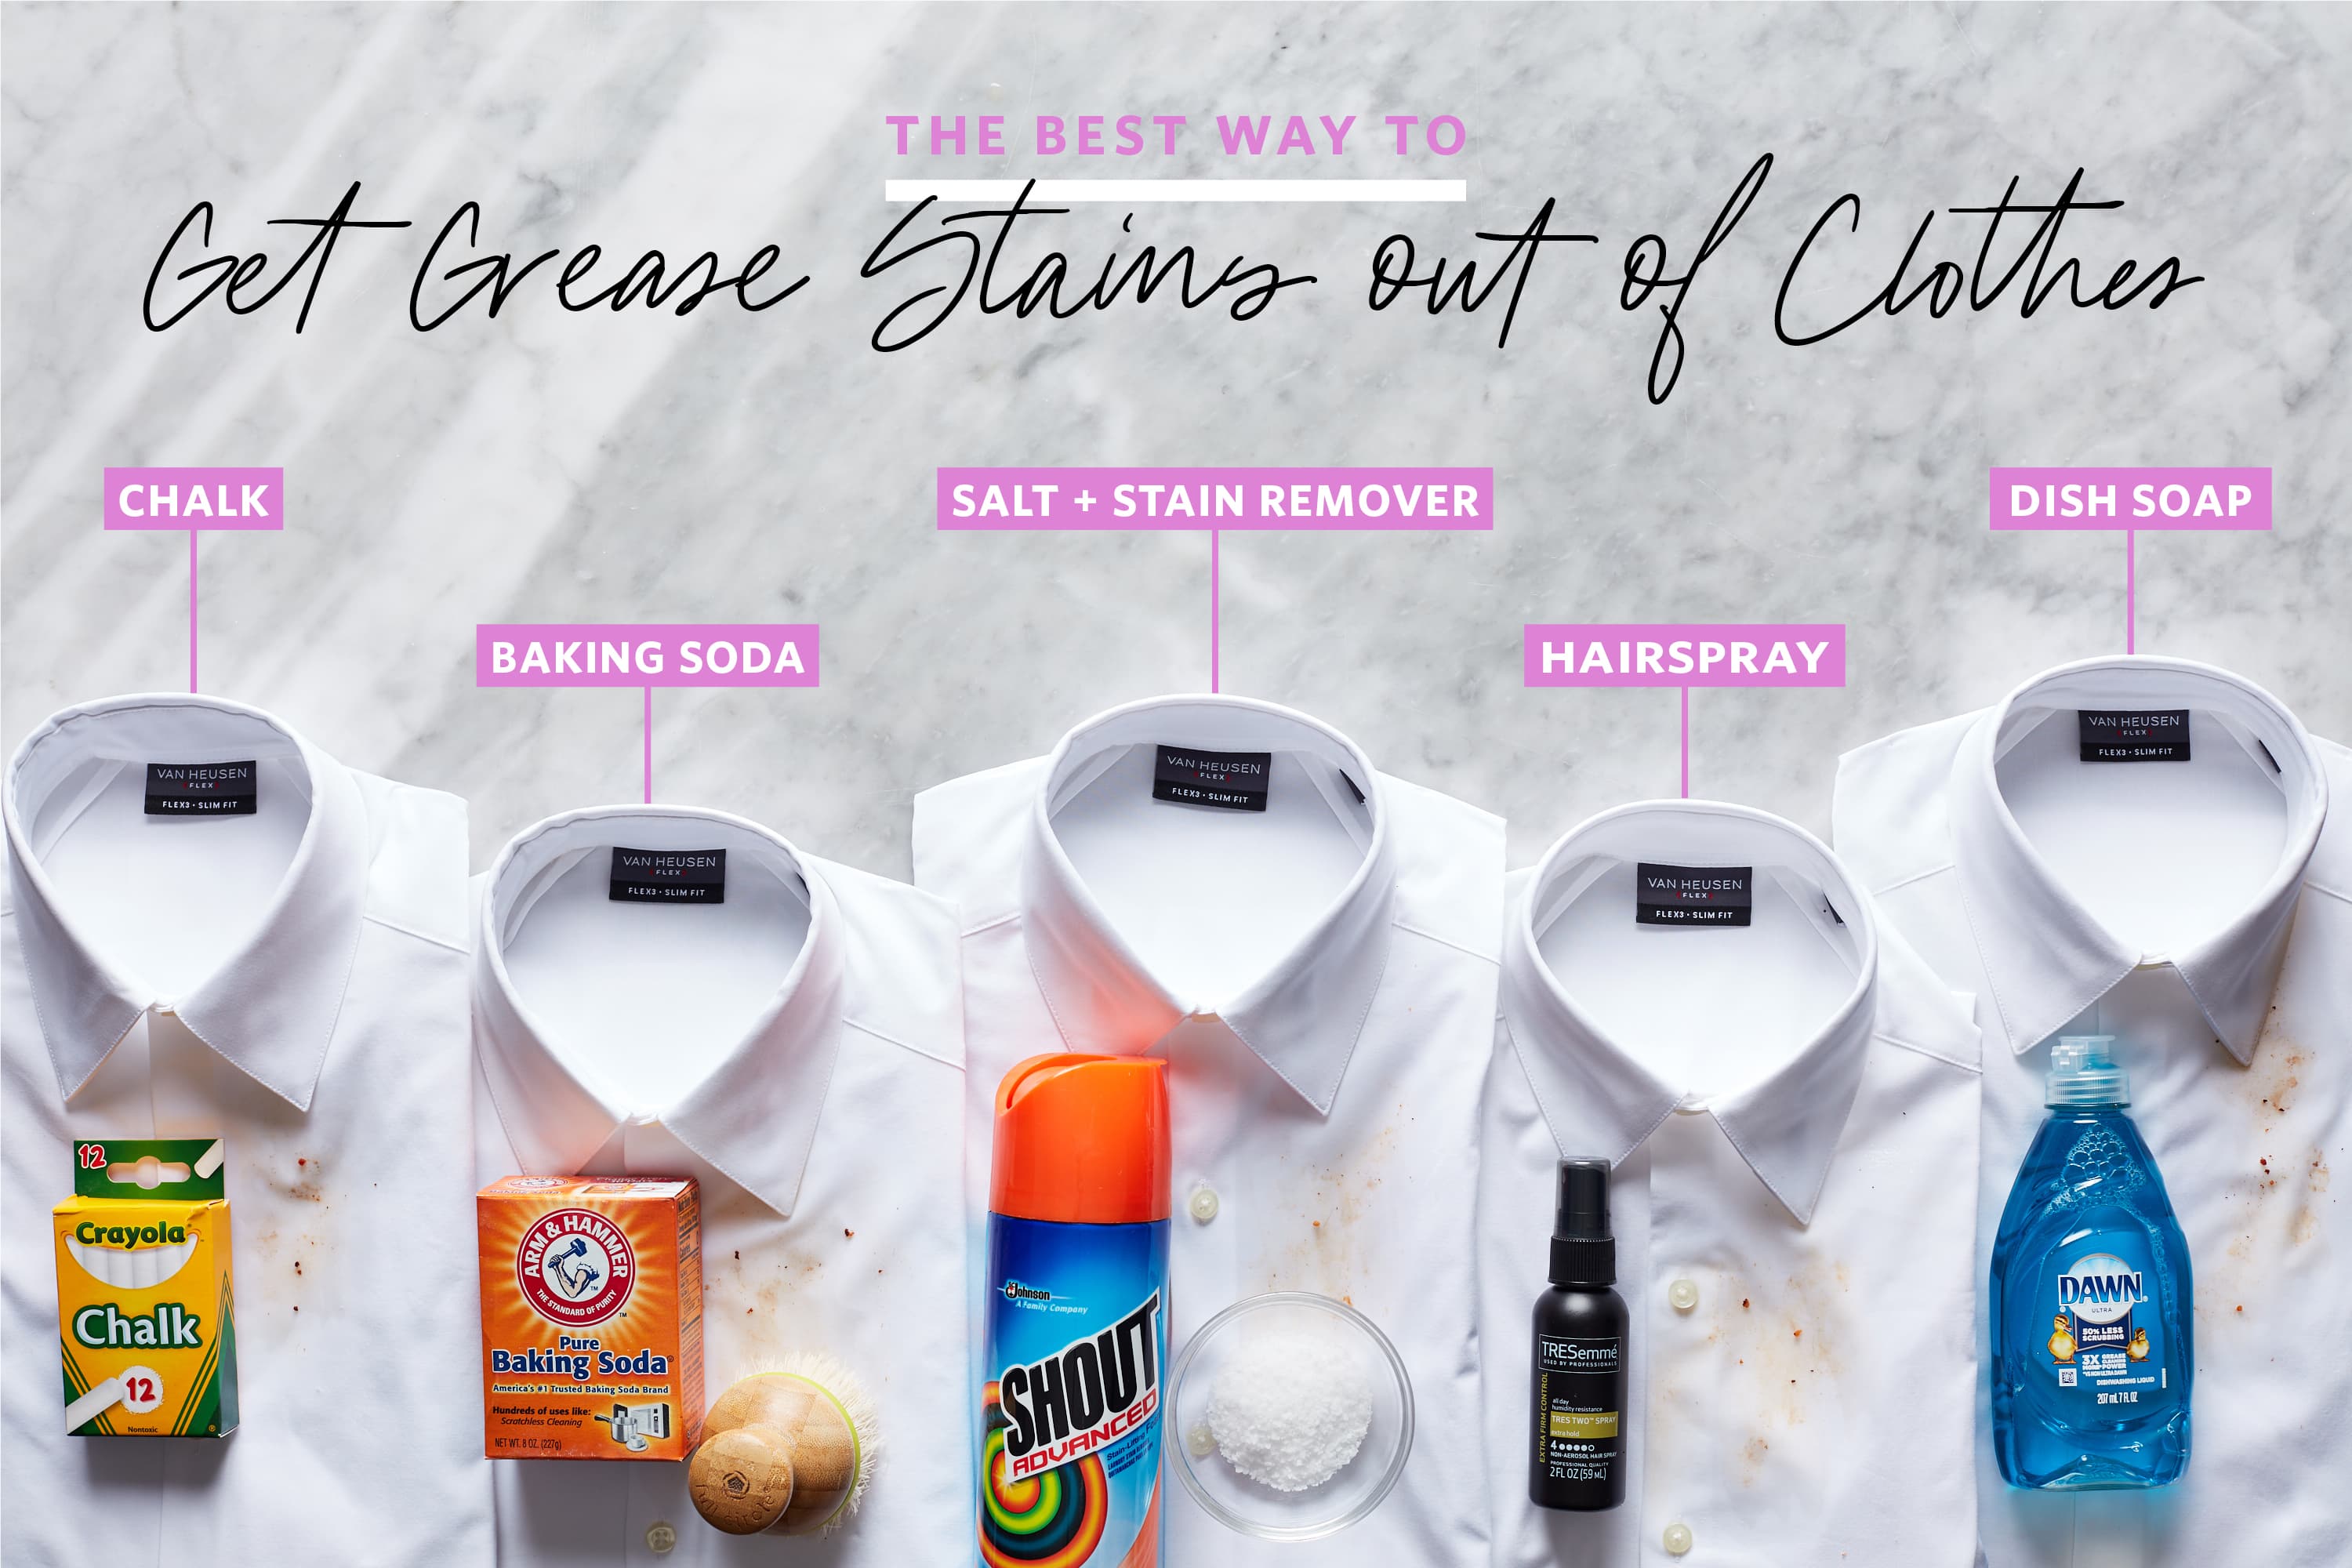 Best Way to Get Grease Stains Out of Clothing  Kitchn